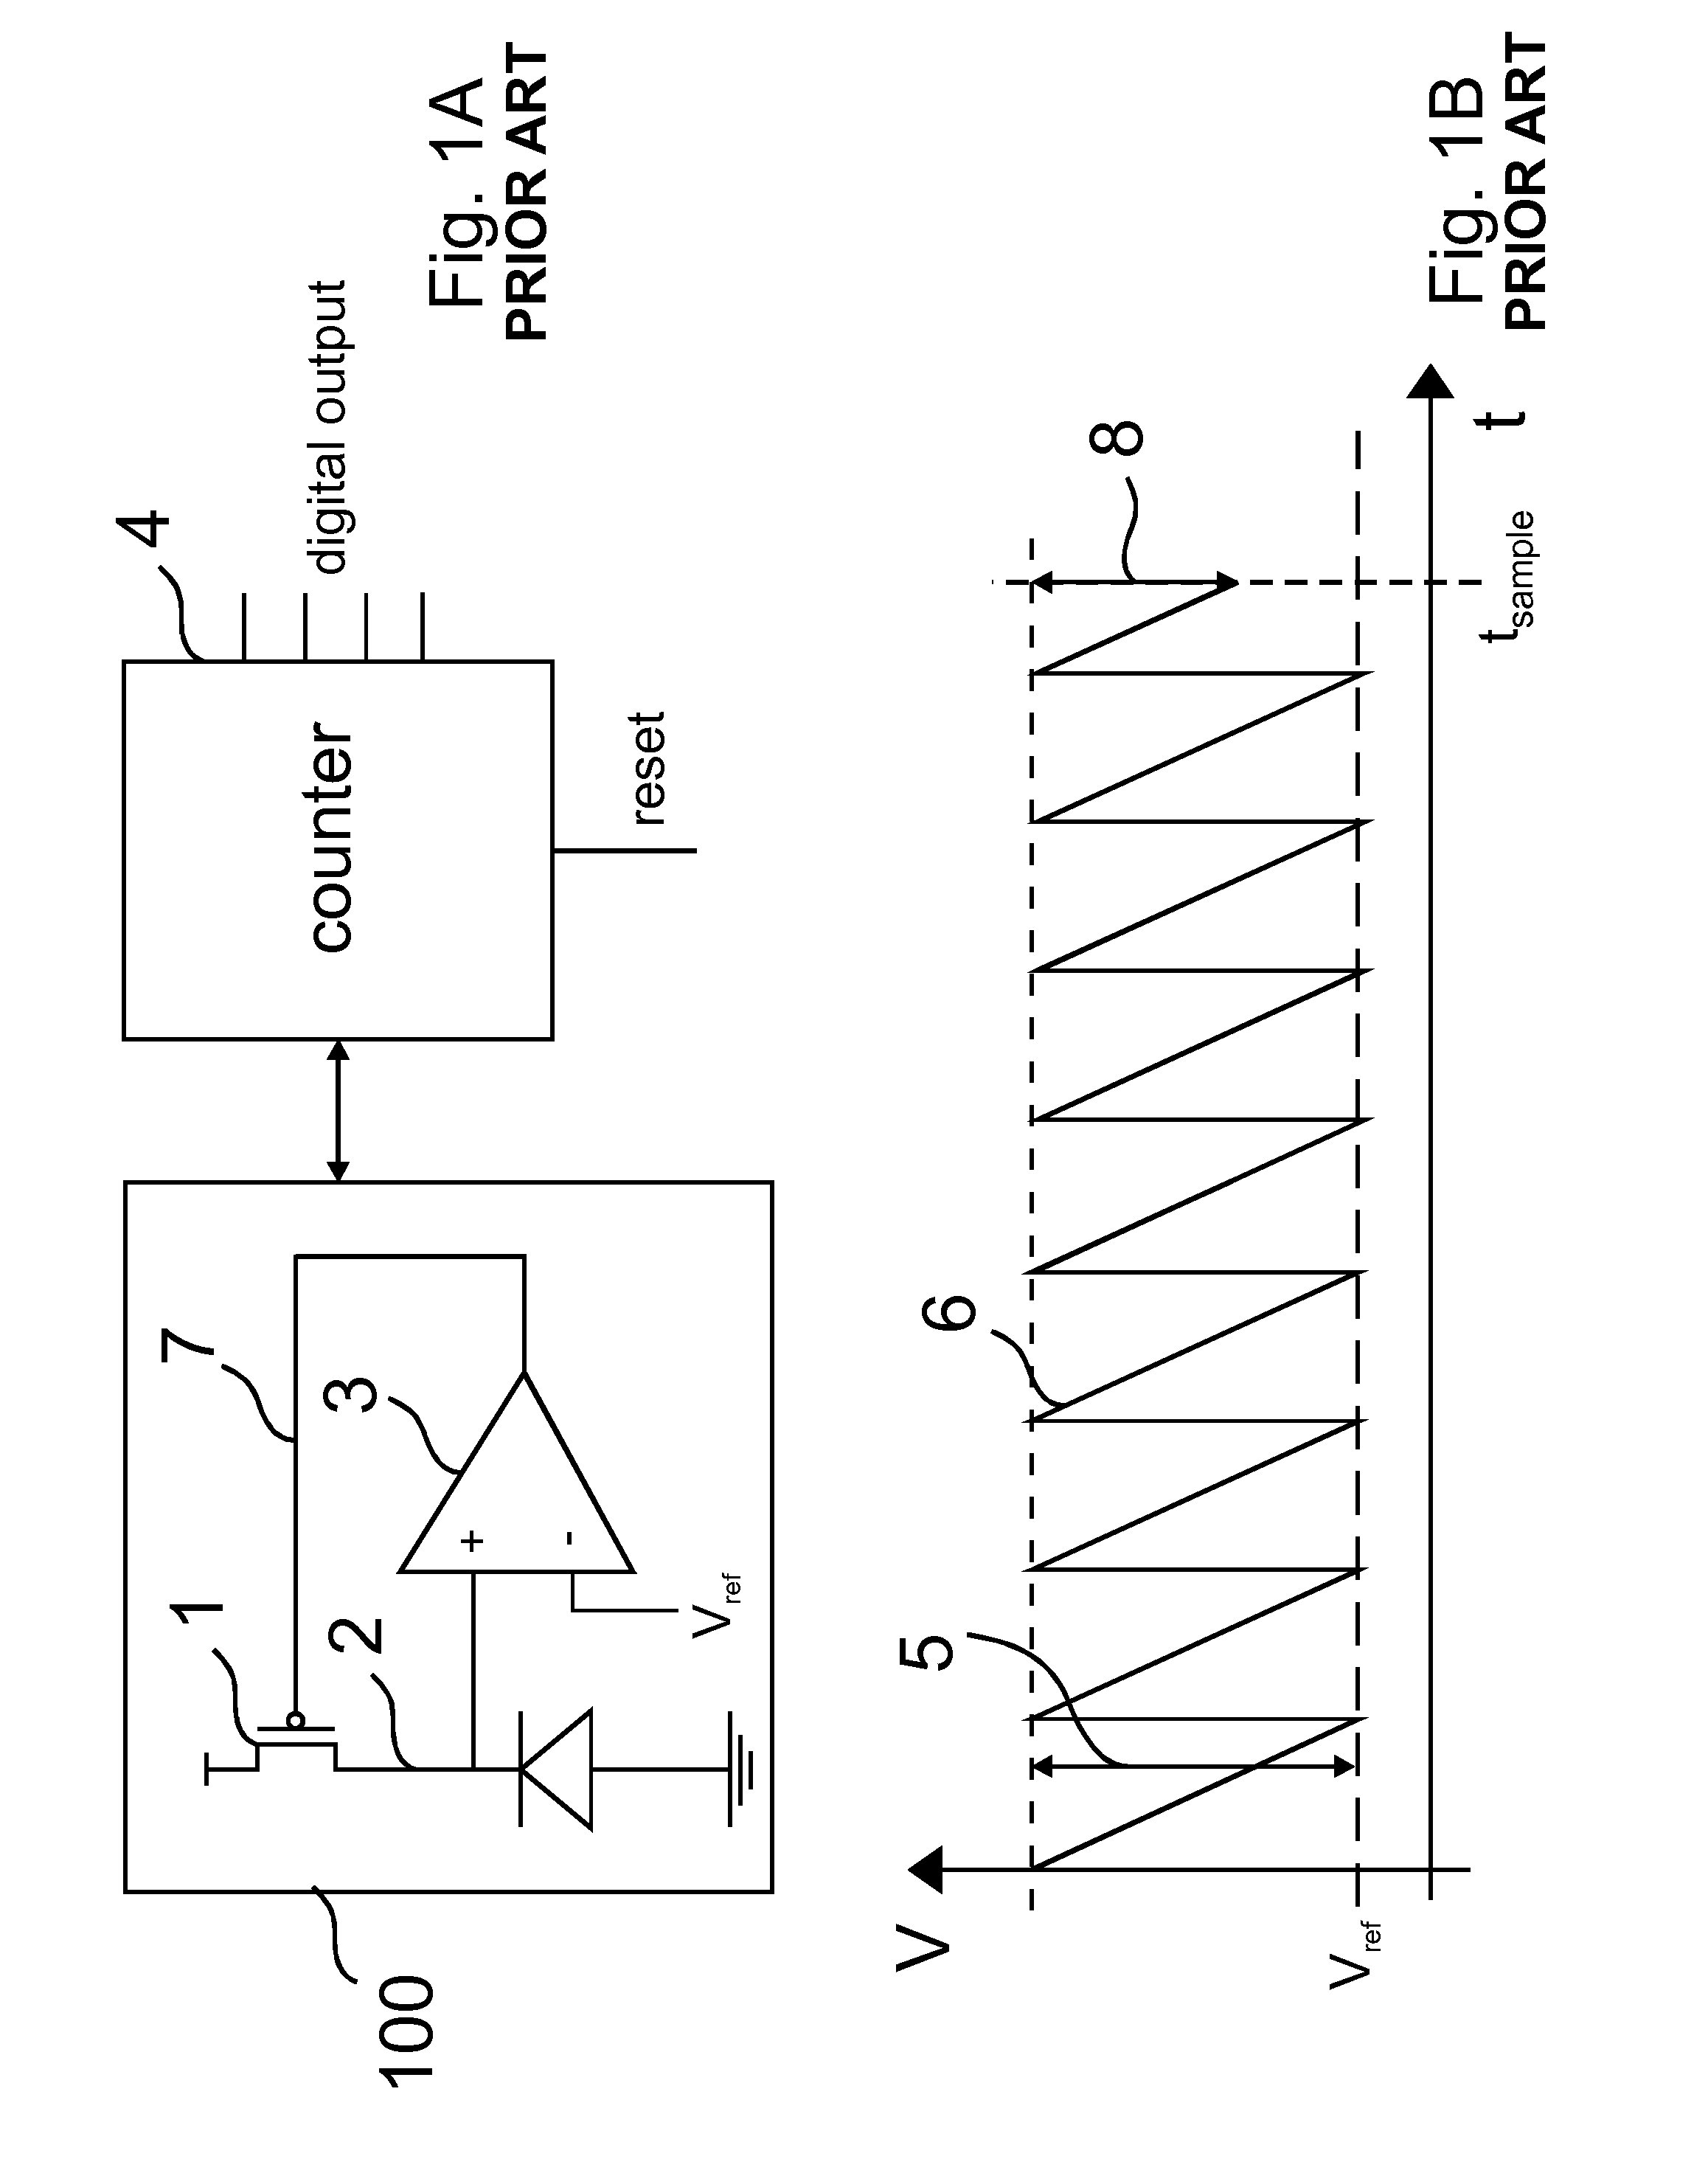 TOF Range Finding With Background Radiation Suppression